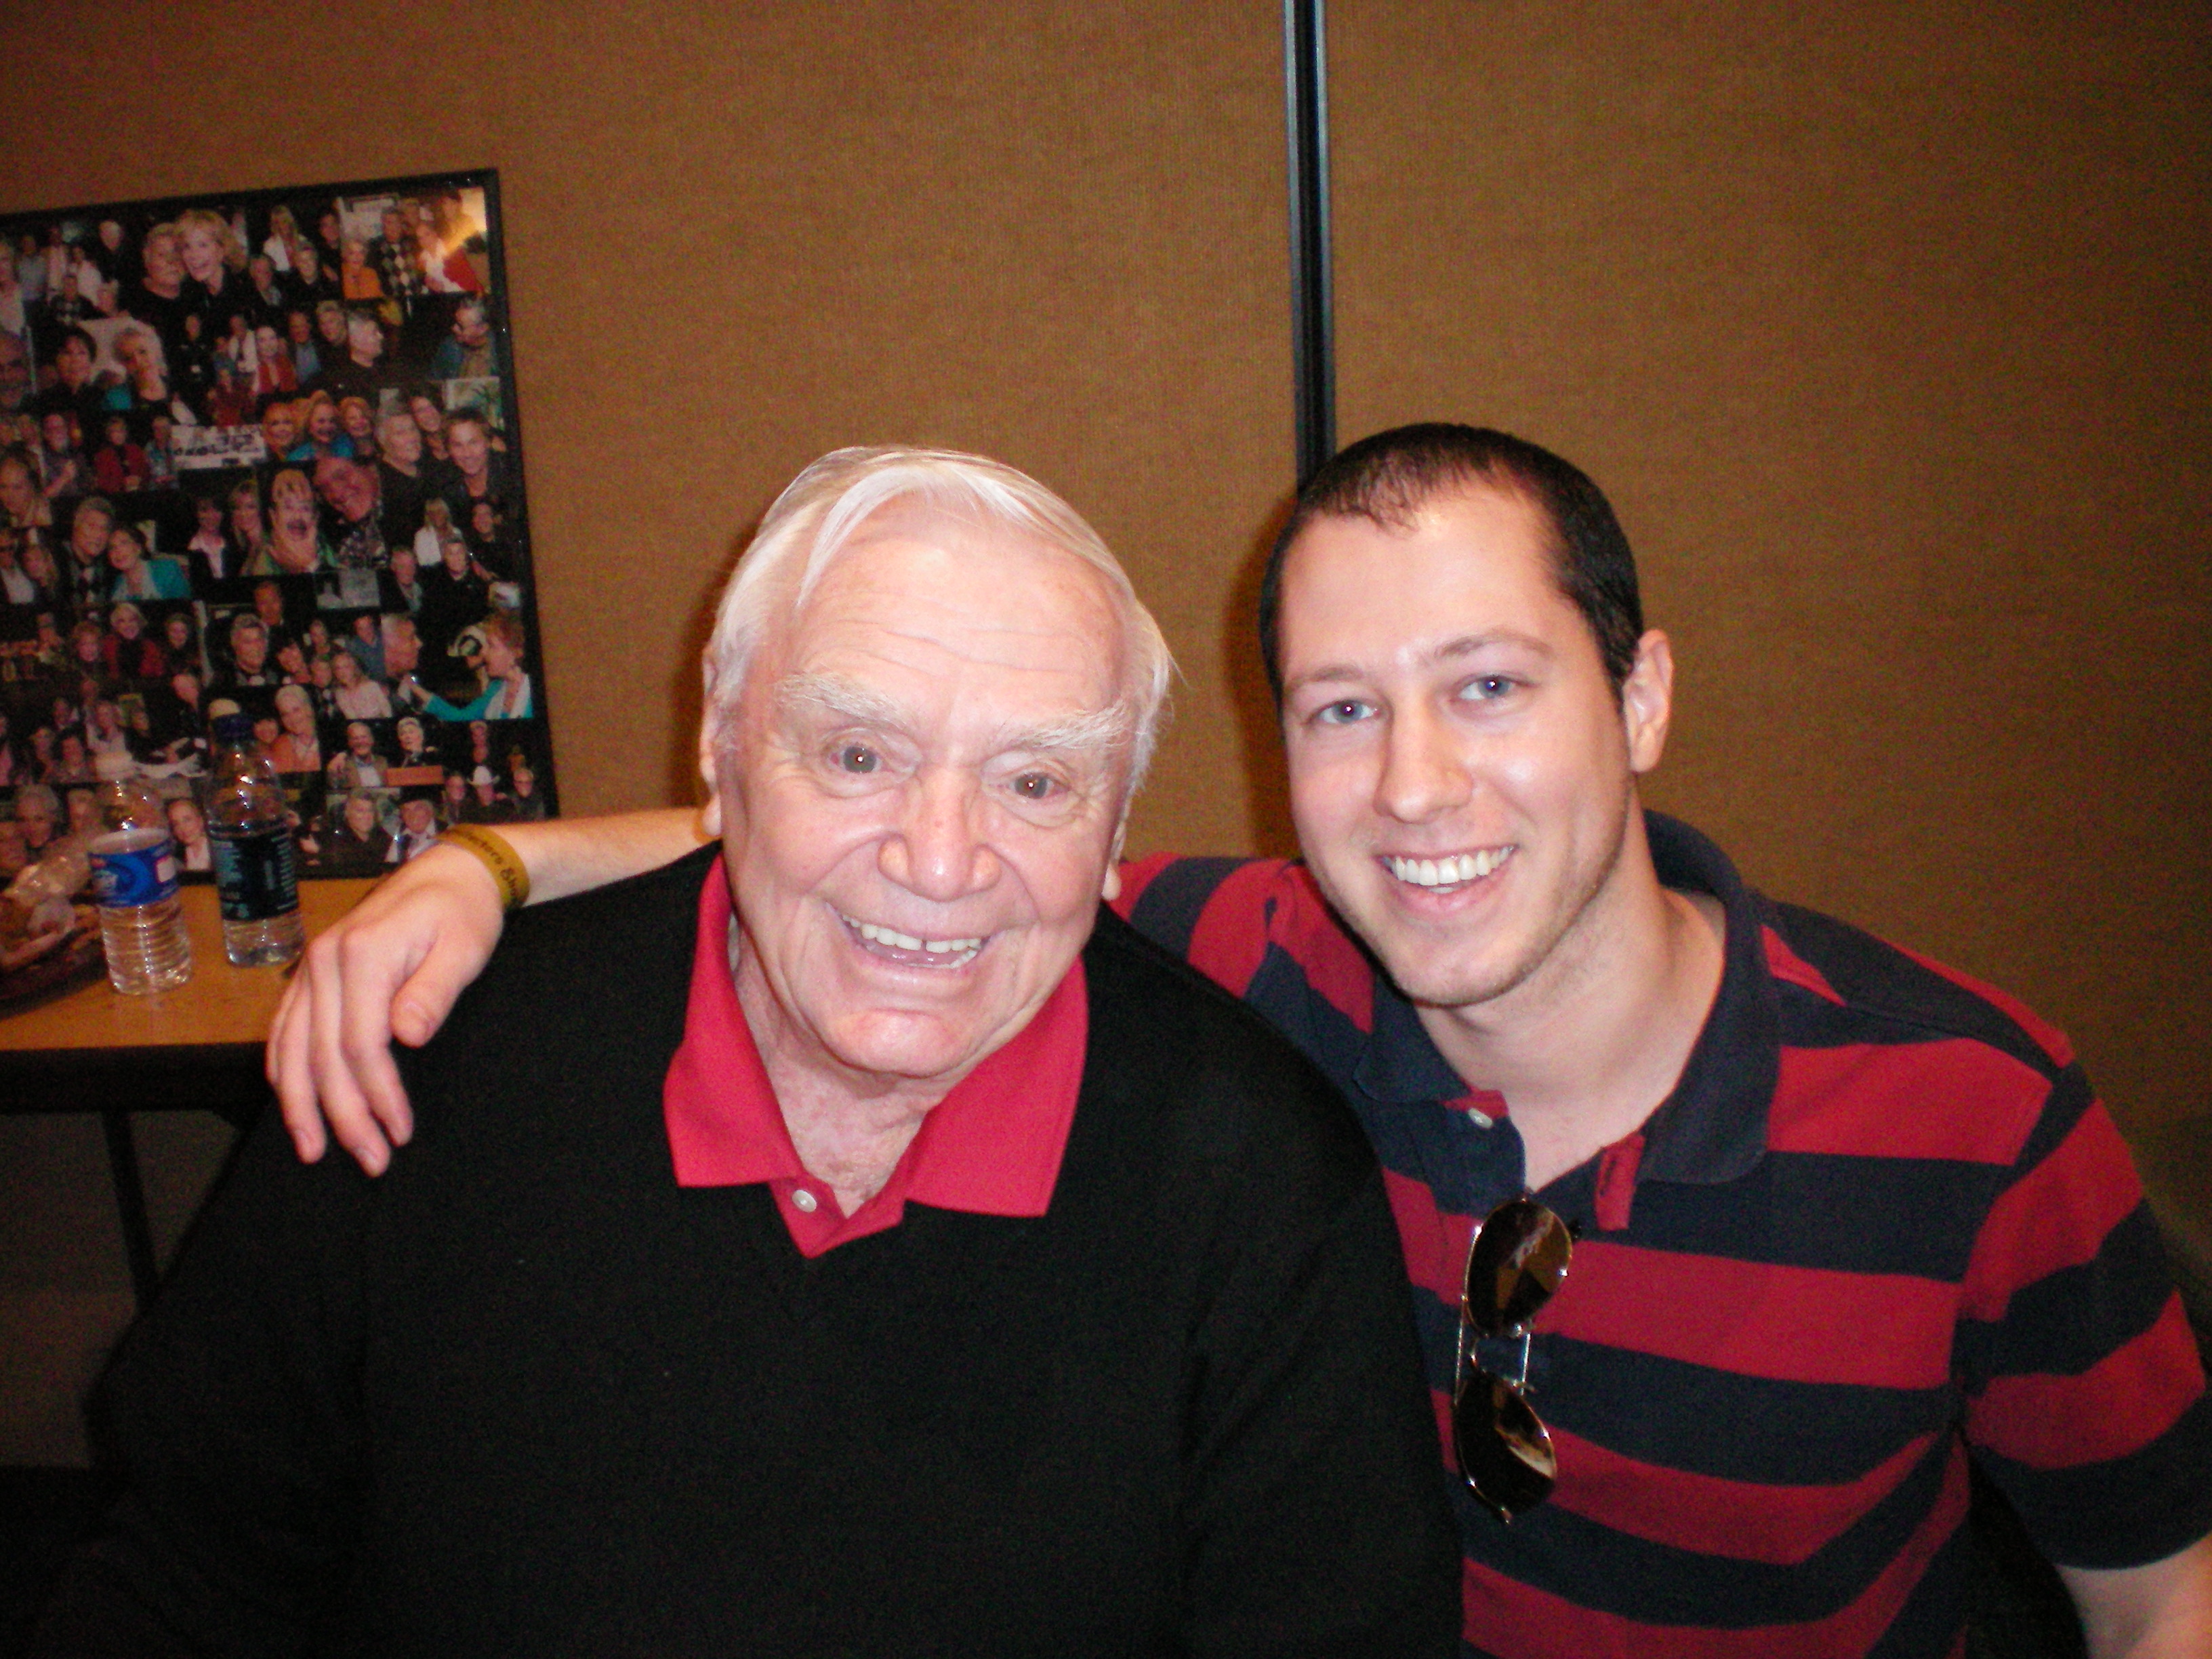 Eric Spudic hanging out with the legendary Ernest Borgnine.